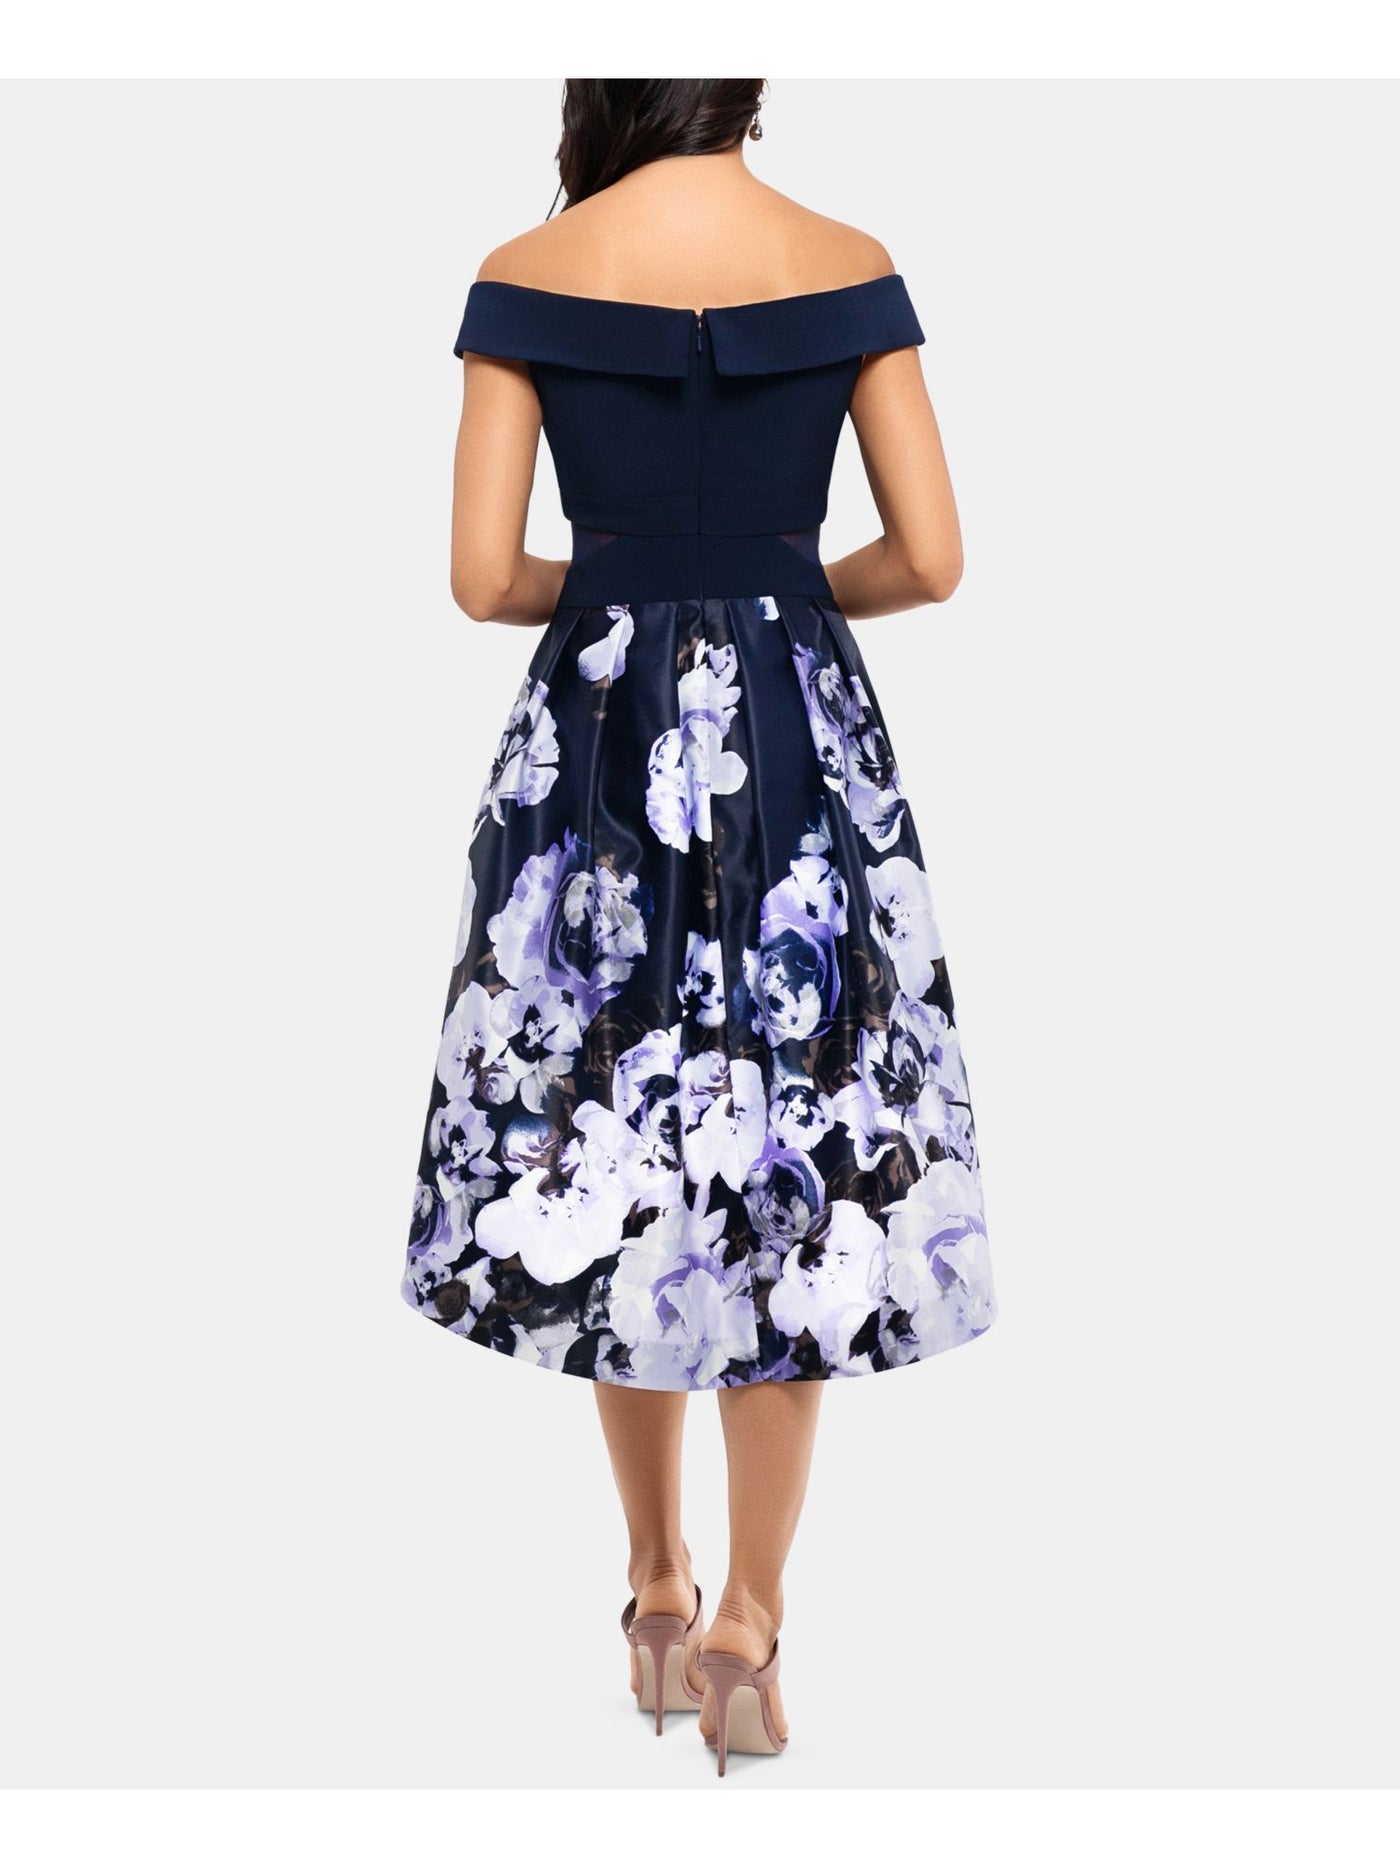 XSCAPE Womens Navy Floral Sleeveless Off Shoulder Midi Formal Fit + Flare Dress Petites 14P